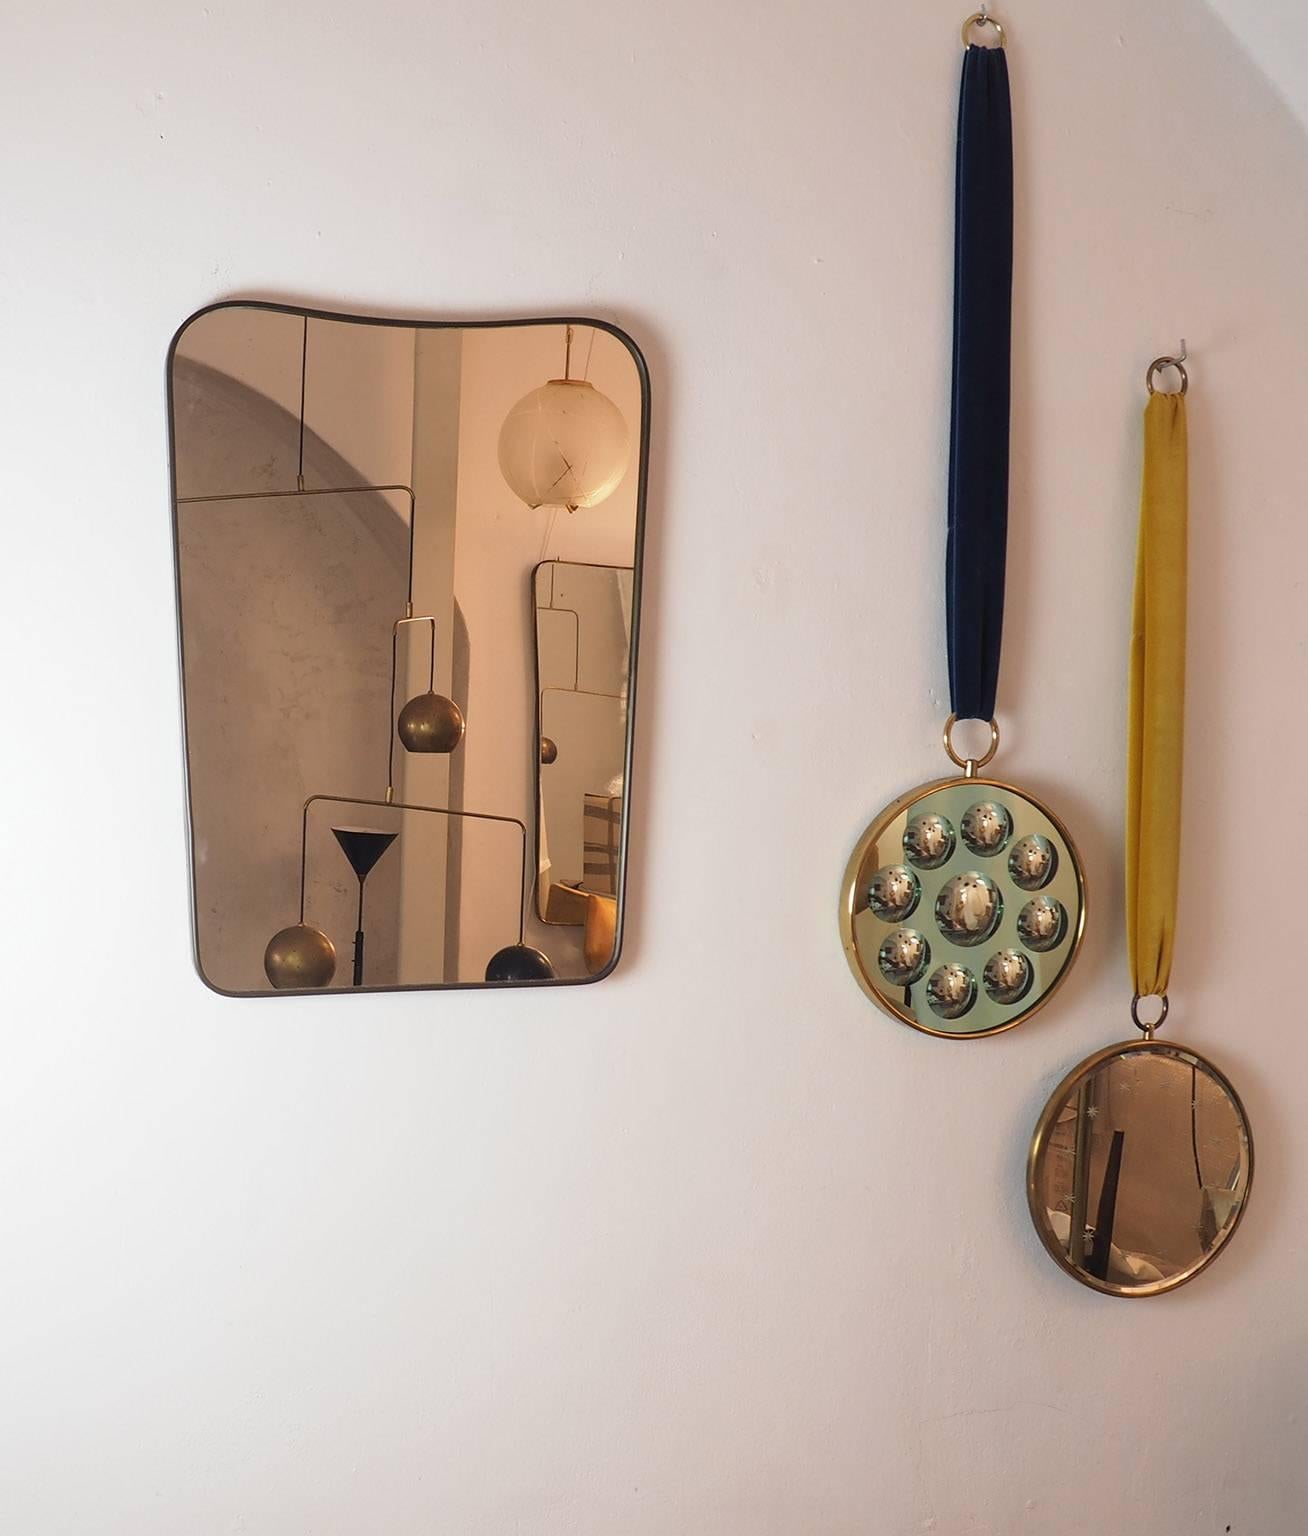 Fontana Arte Midcentury Wall Round Brass Mirror with Engraved Stars, Italy 1950s For Sale 2